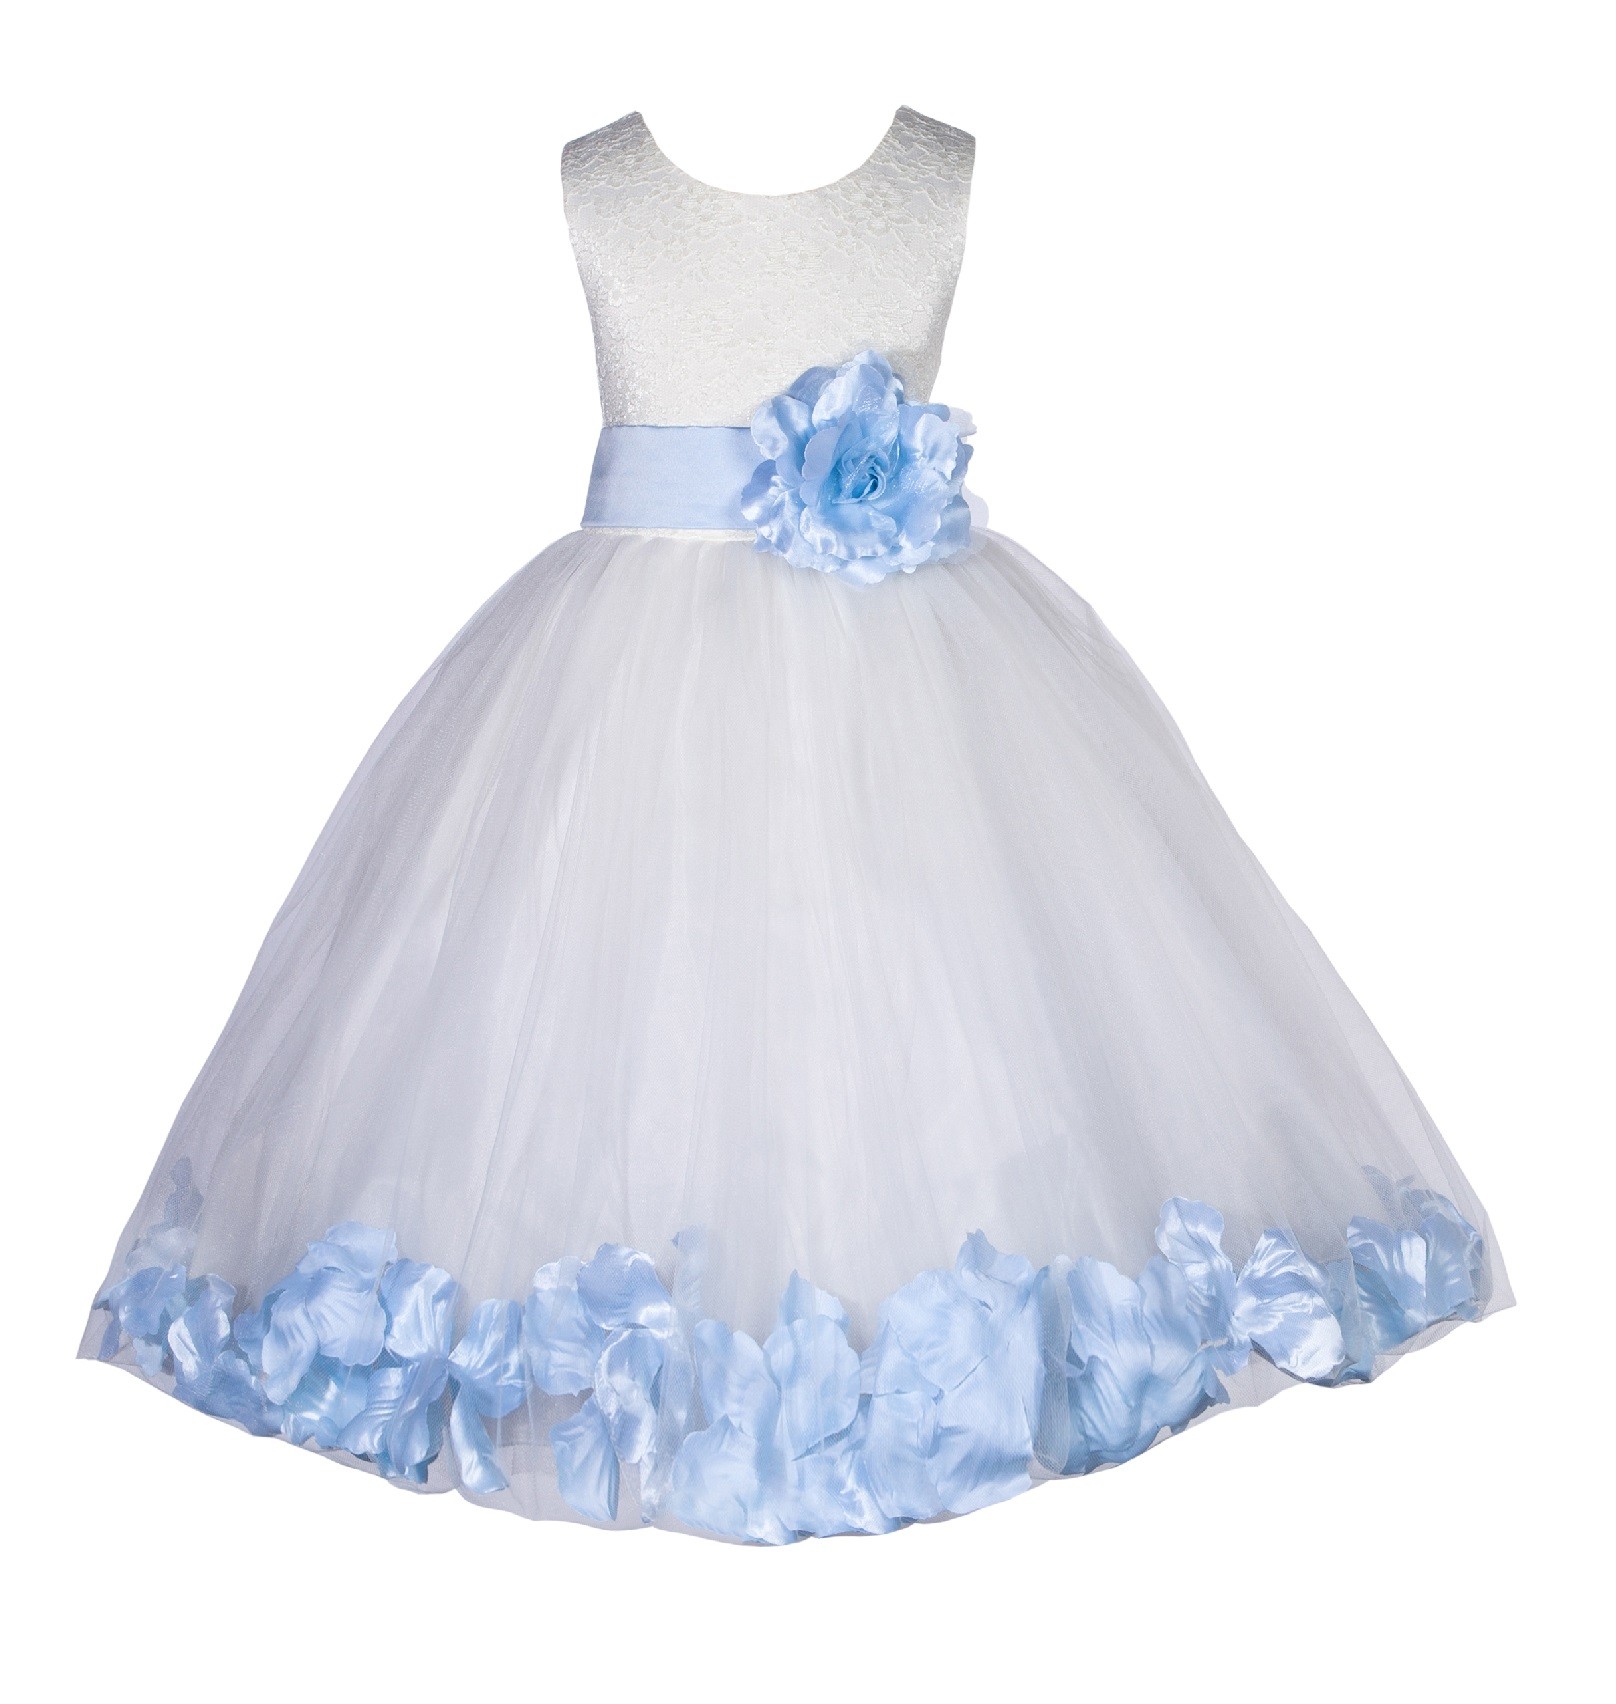 Ivory/Ice Blue Lace Top Floral Petals Ivory Flower Girl Dress 165T